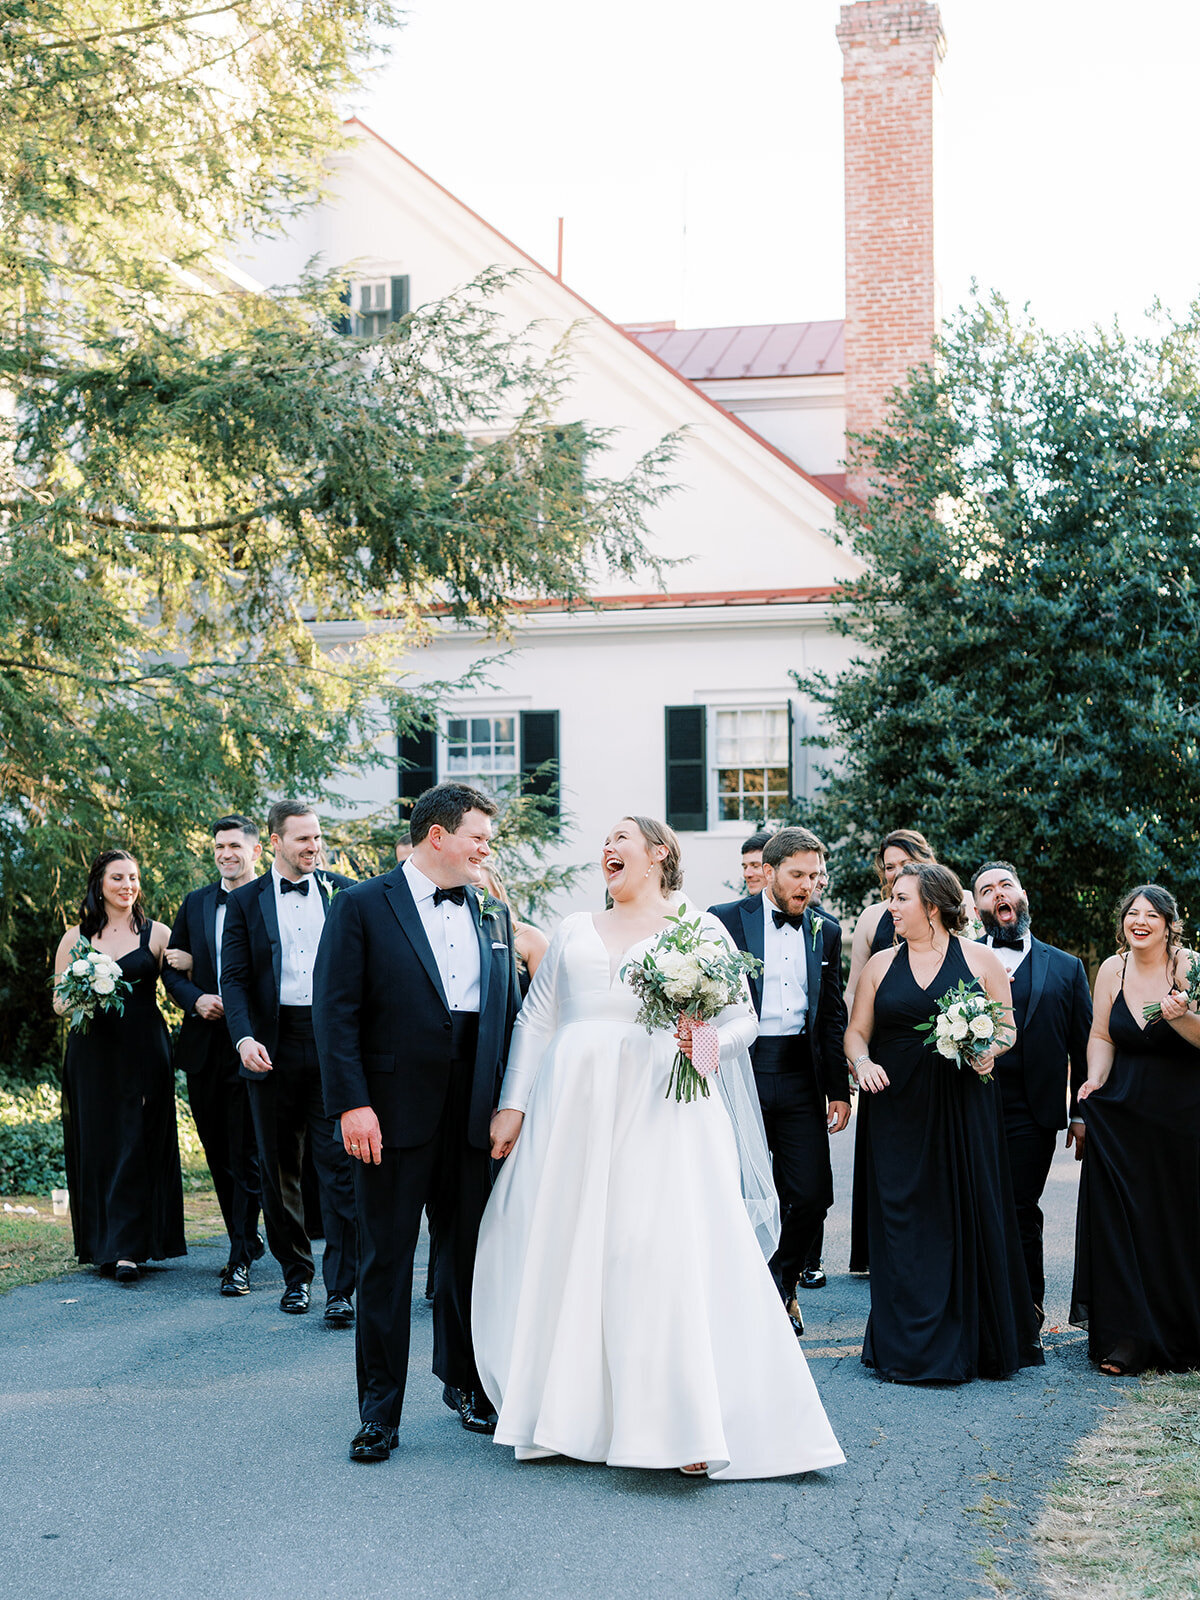 Bride and groom laugh as they walk with their bridal party at rosemont manor